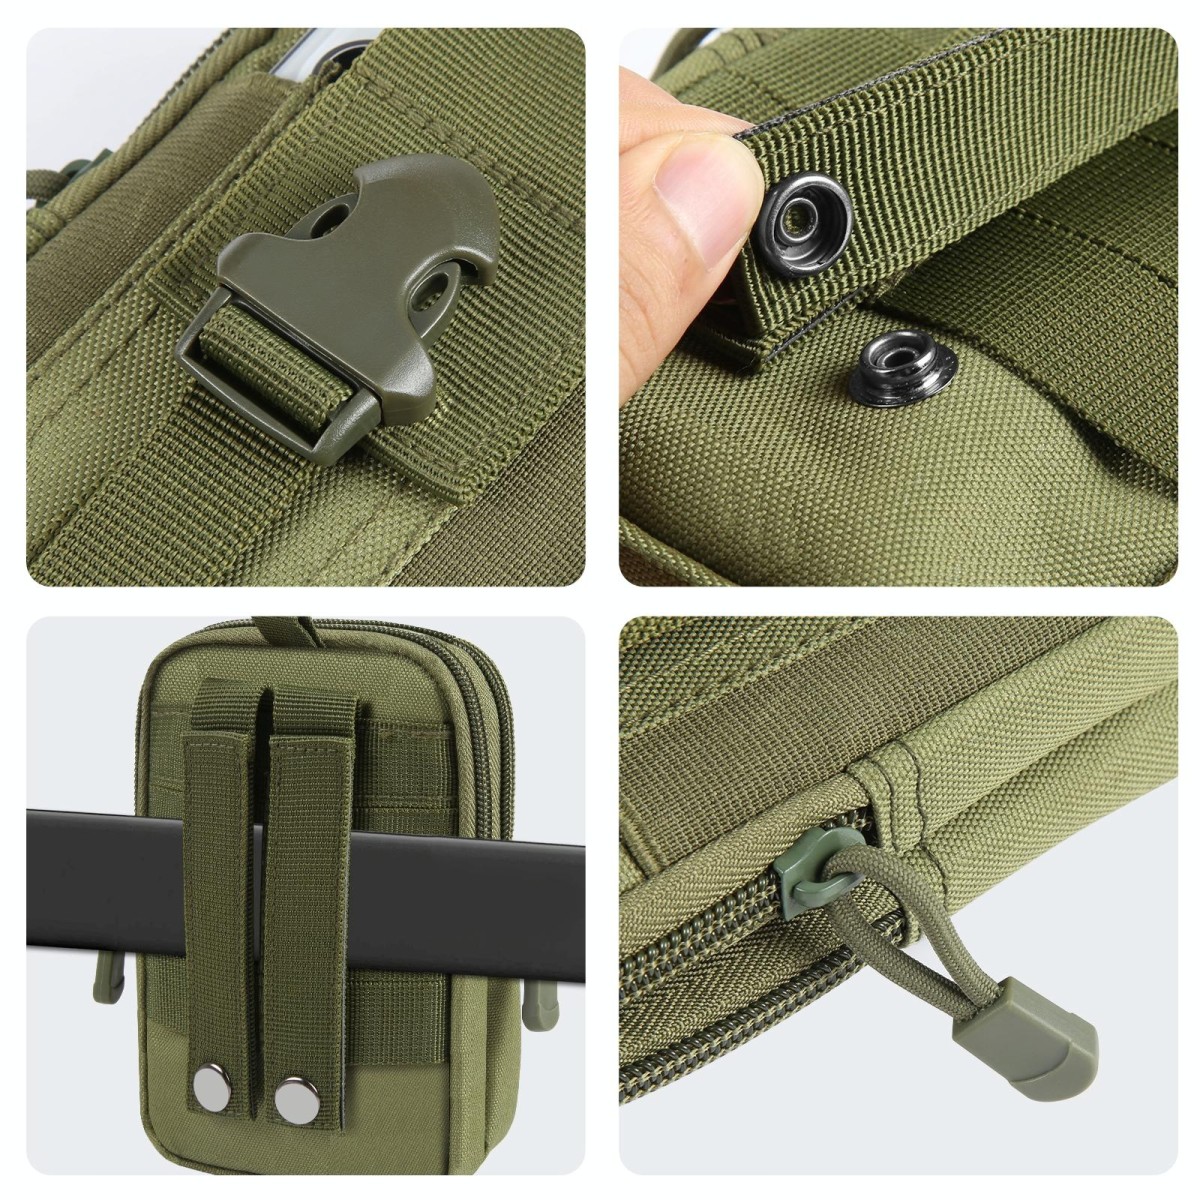 HAWEEL Hiking Belt Waist Bag Outdoor Sport Motorcycle Bag 7.0 inch Phone Pouch (Army Green)